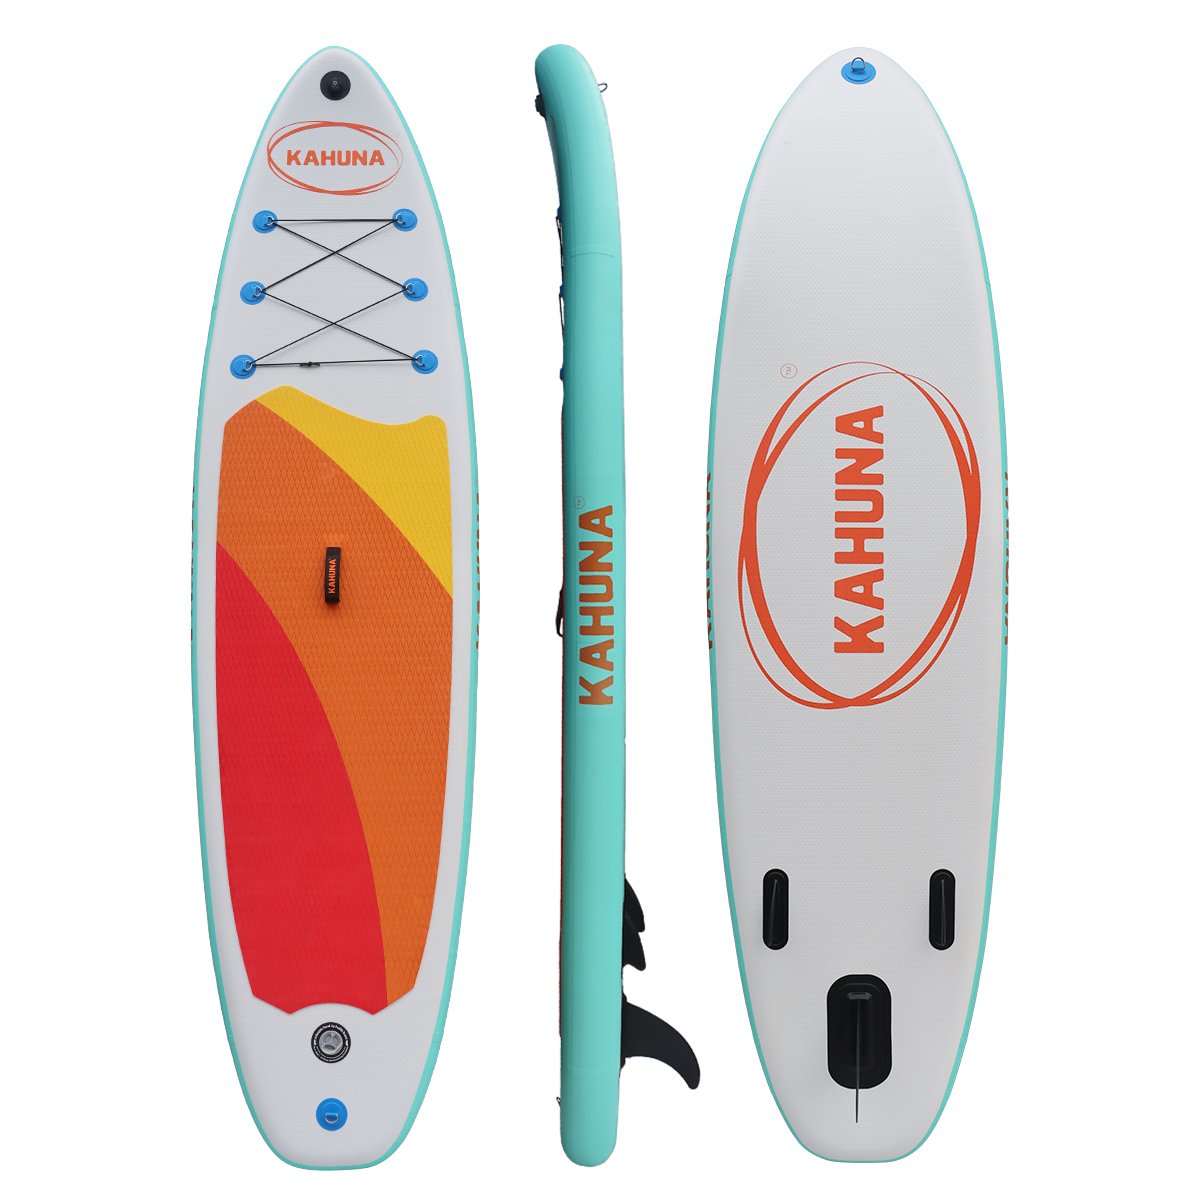 Inflatable Stand Up Paddle Board 11FT SUP Paddleboard for Water Adventures